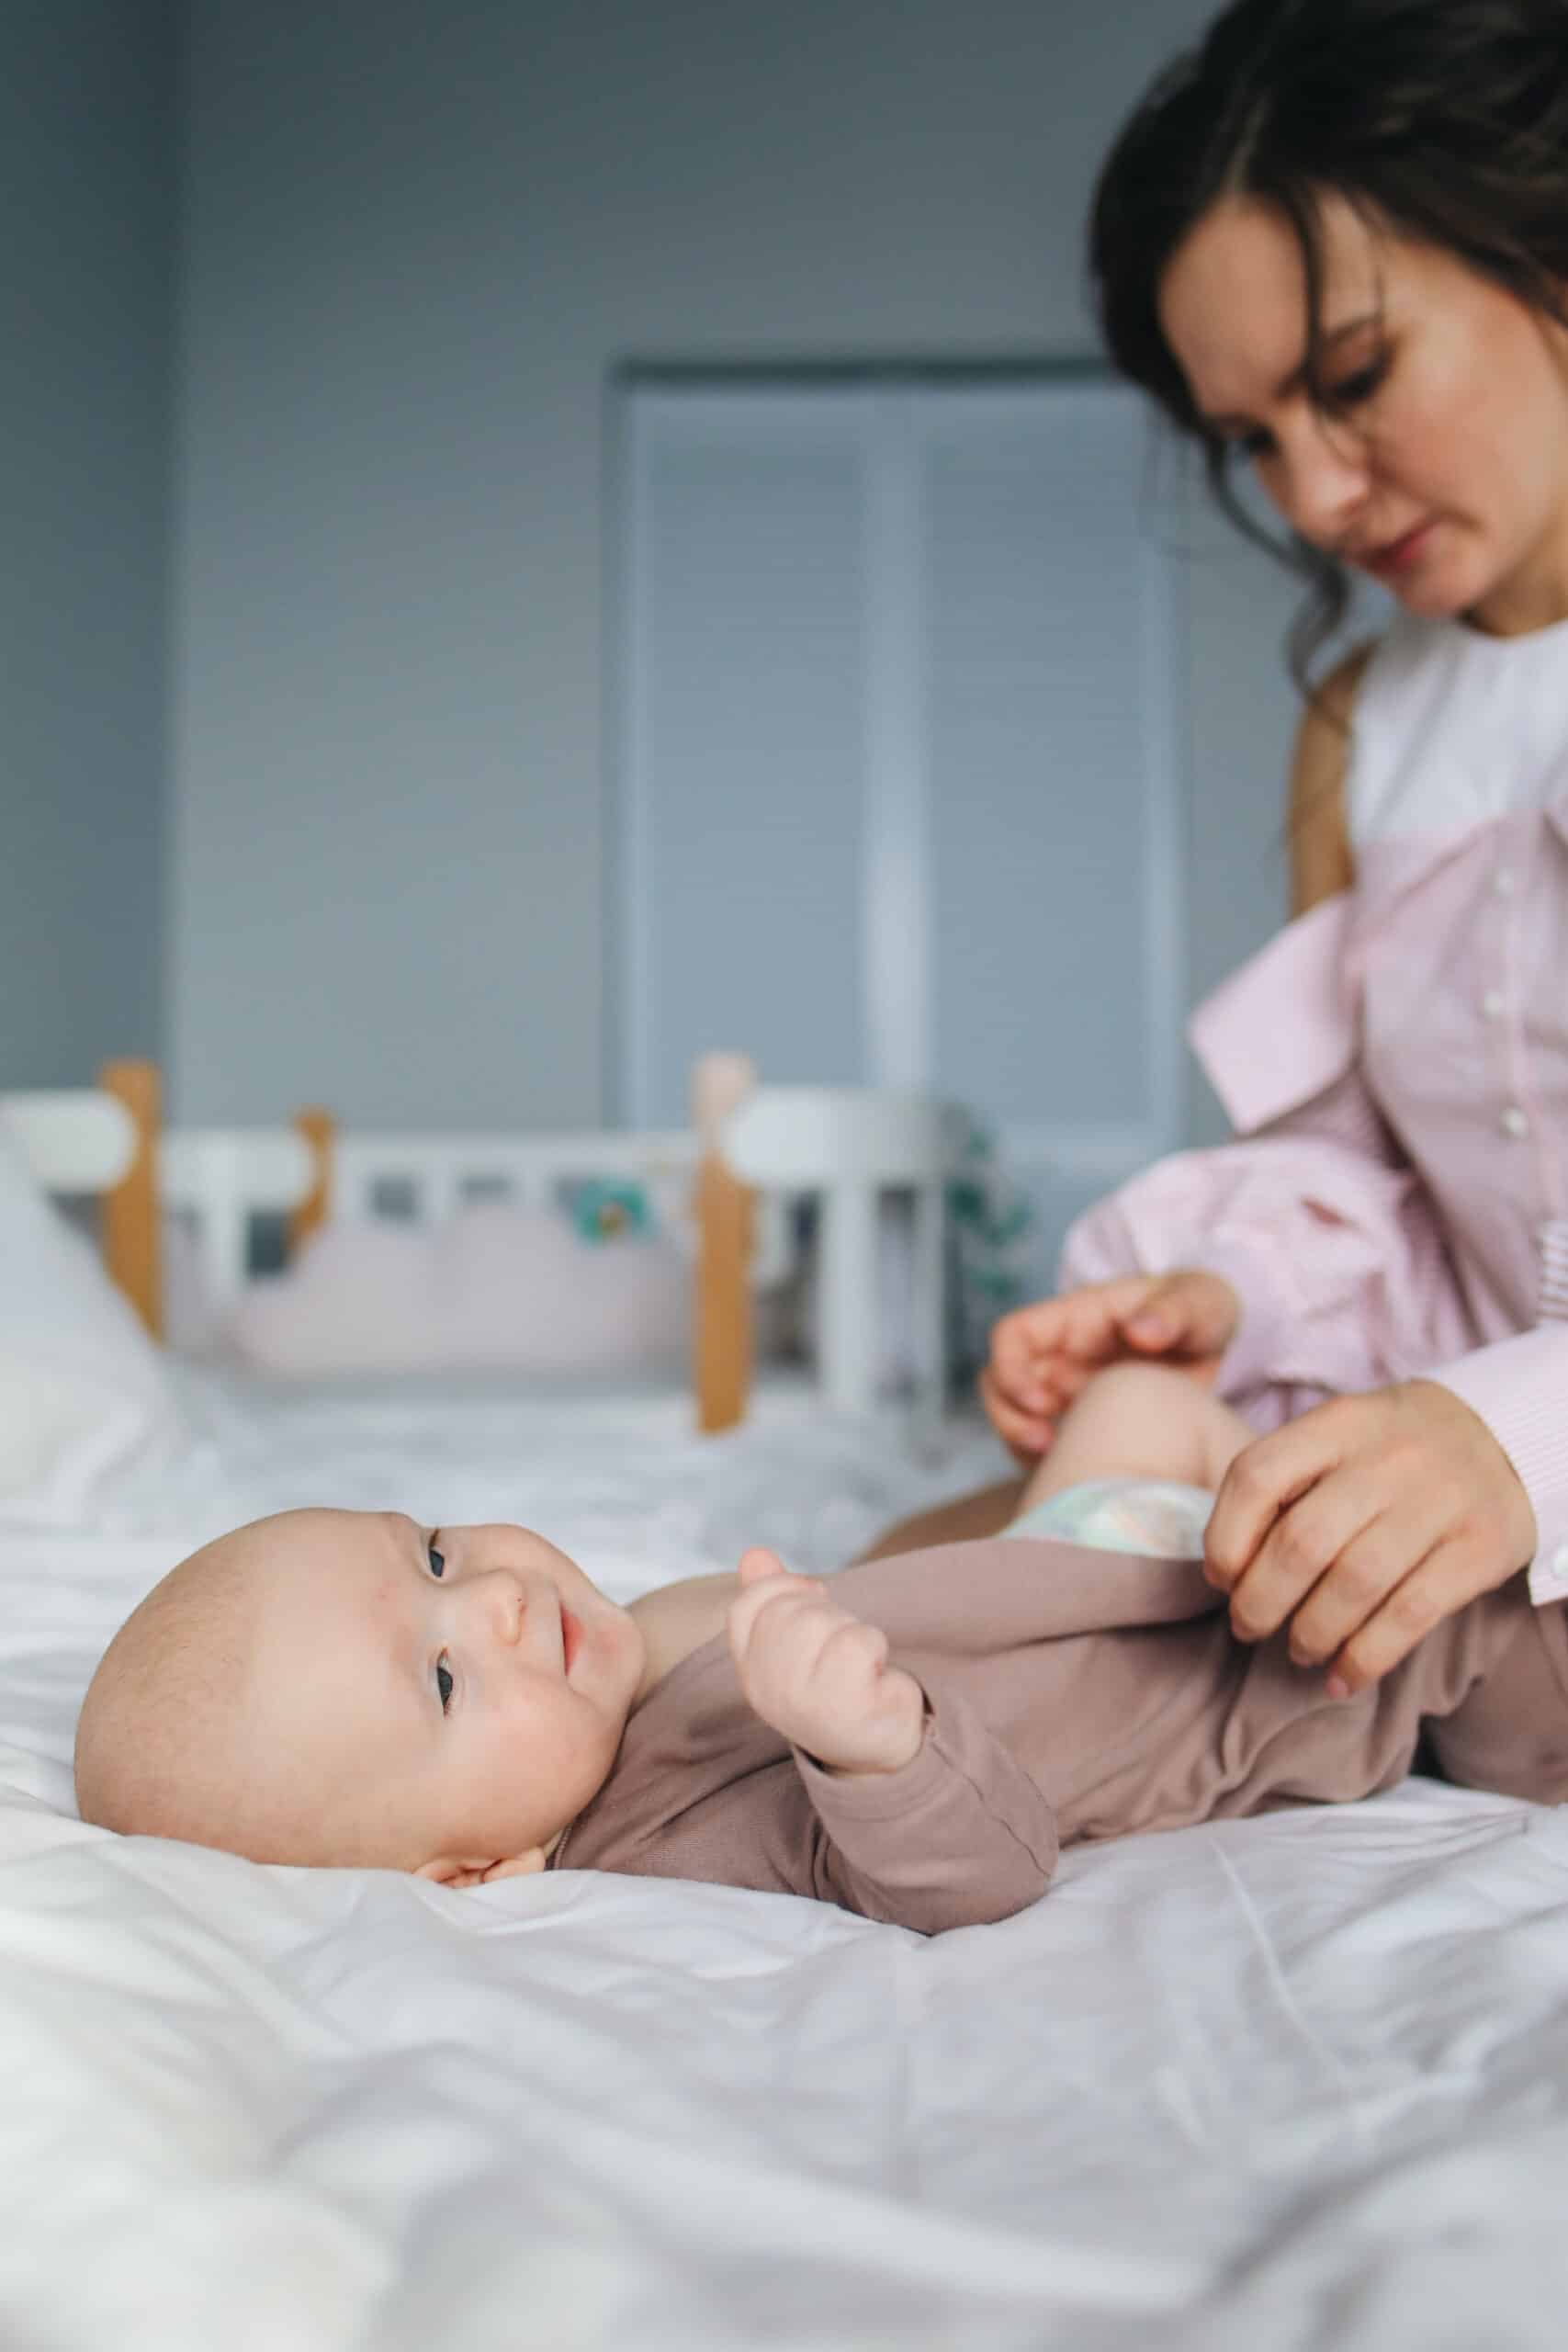 A caring woman gently changing clothes of a content baby lying down, ensuring the infant is comfortable and well-dressed.